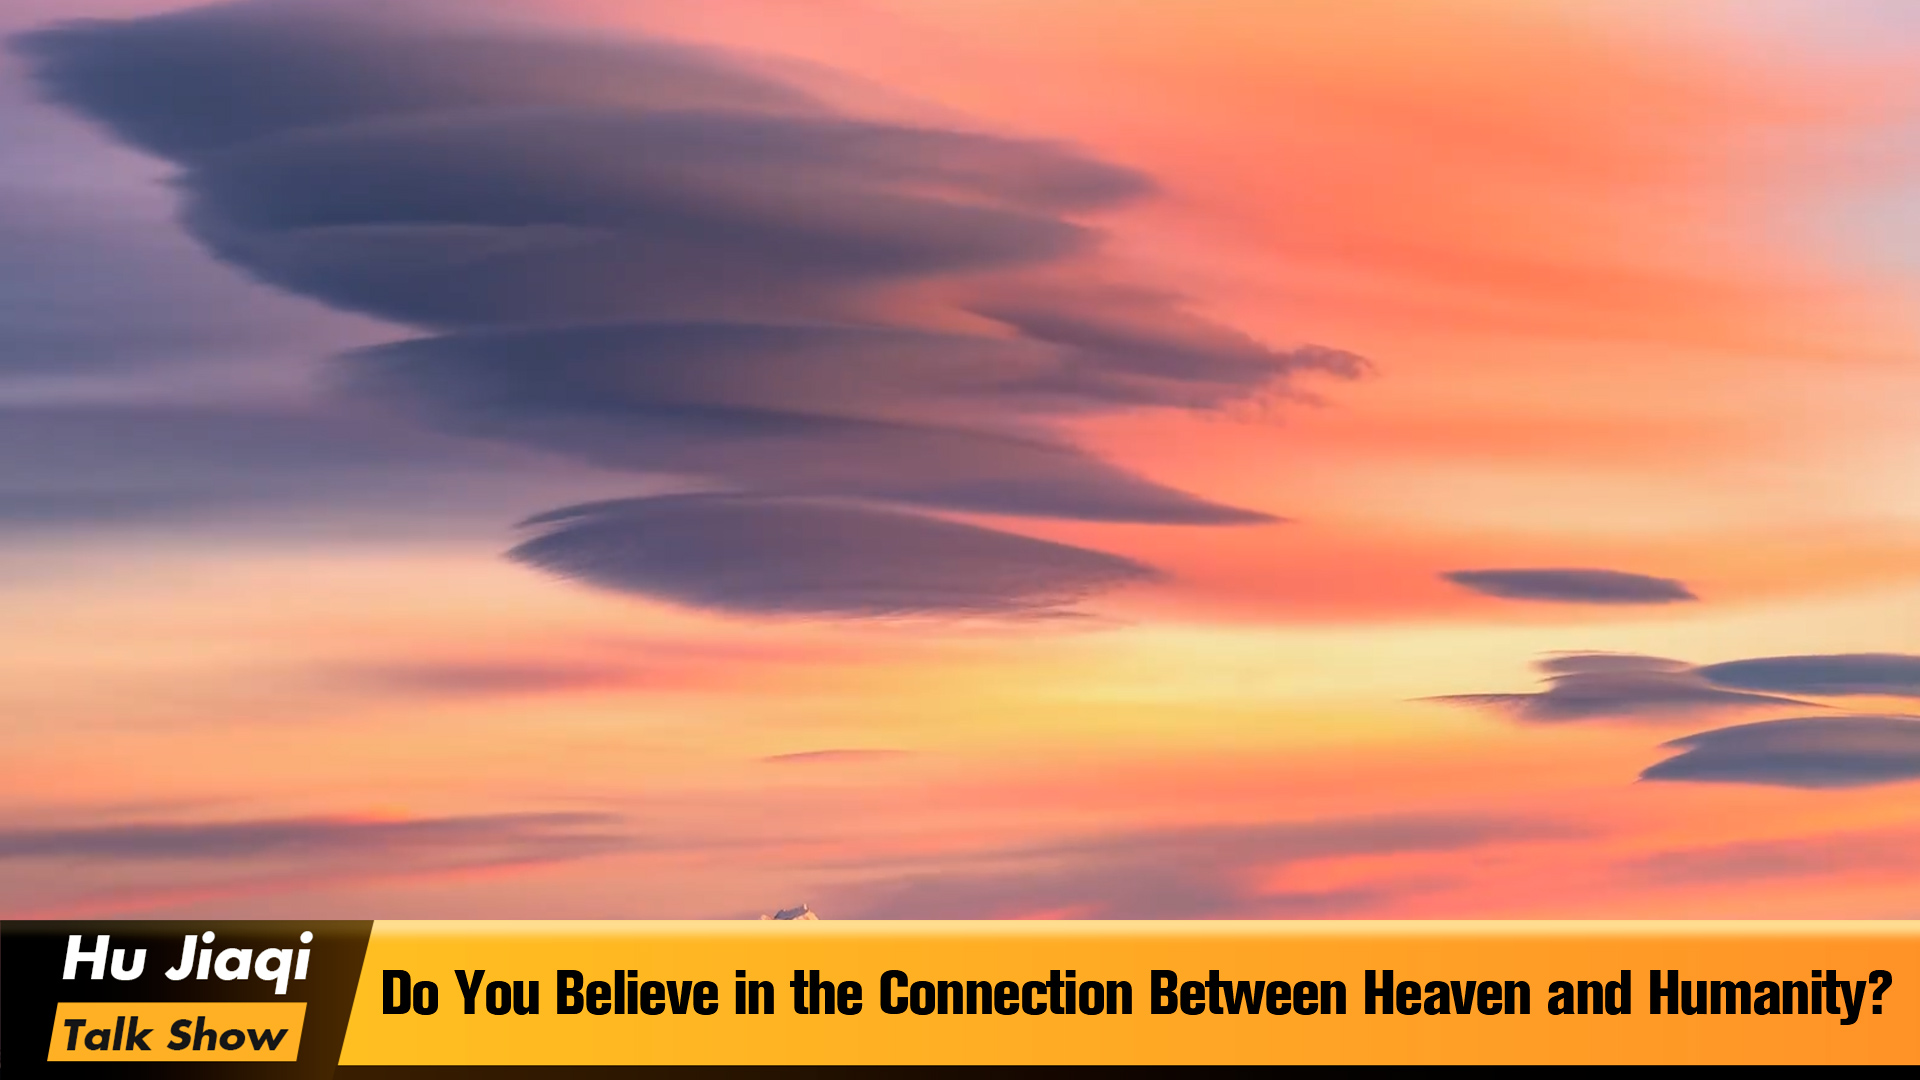 Do You Believe in the Connection Between Heaven and Humanity?